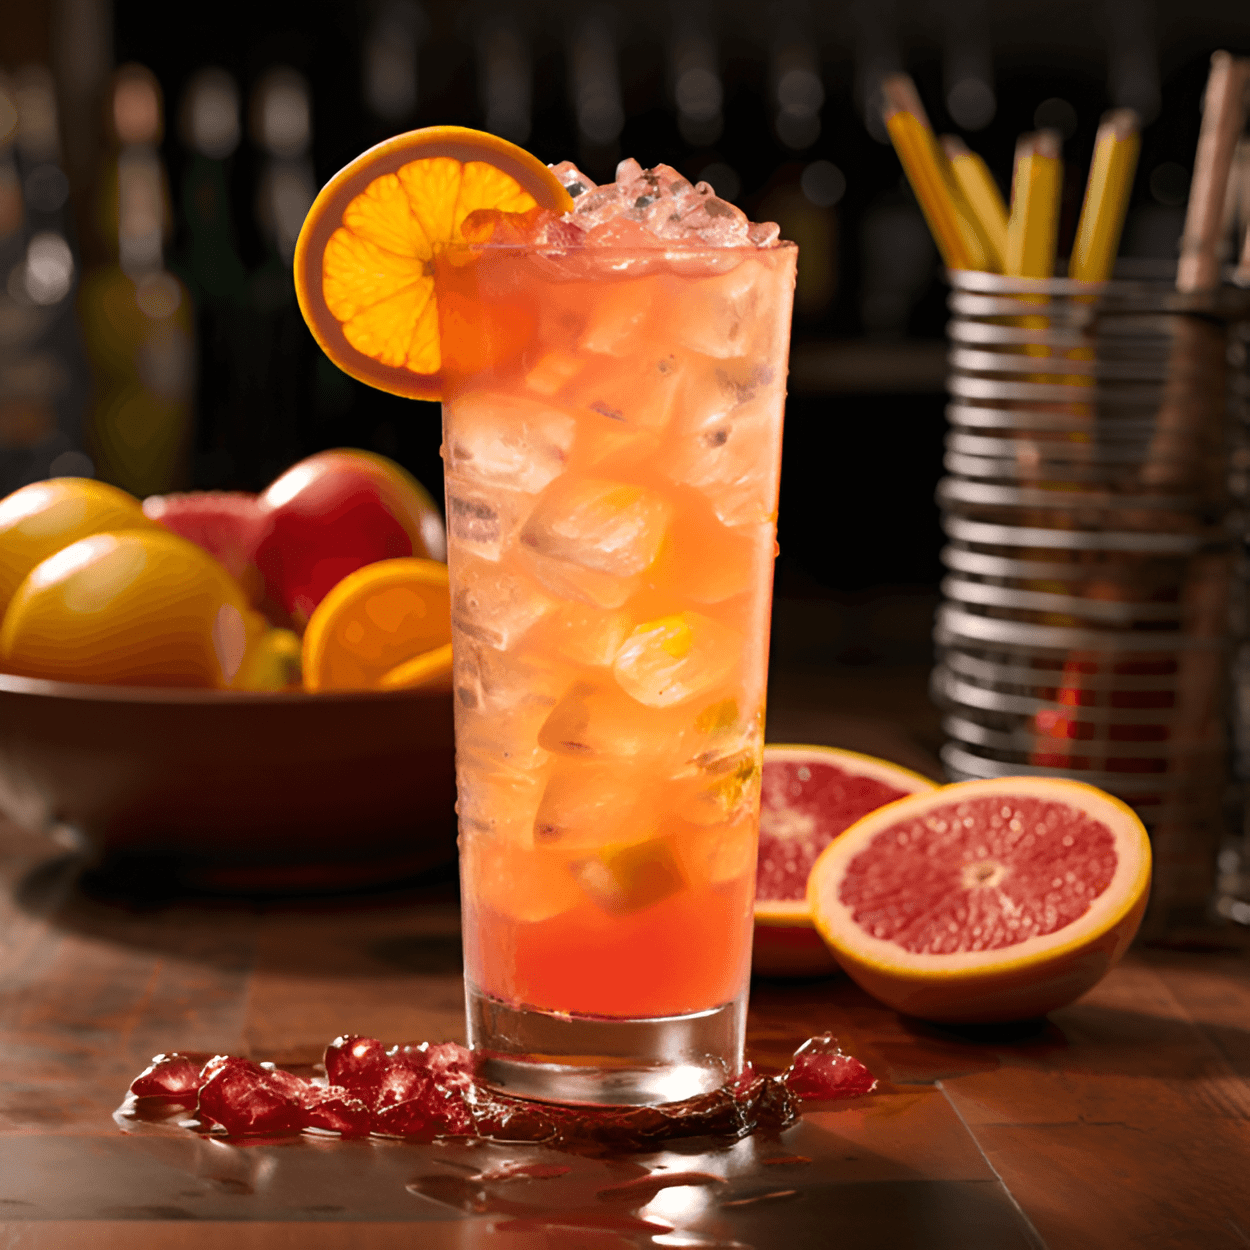 Texas Twister Cocktail Recipe - The Texas Twister is a sweet, fruity cocktail with a refreshing tang. The blend of orange, pineapple, and grapefruit juices gives it a tropical, citrusy flavor, while the vodka and rum add a subtle, warming kick. The cocktail is balanced, not too sweet nor too tart, making it a delightful sipper on a hot summer day.